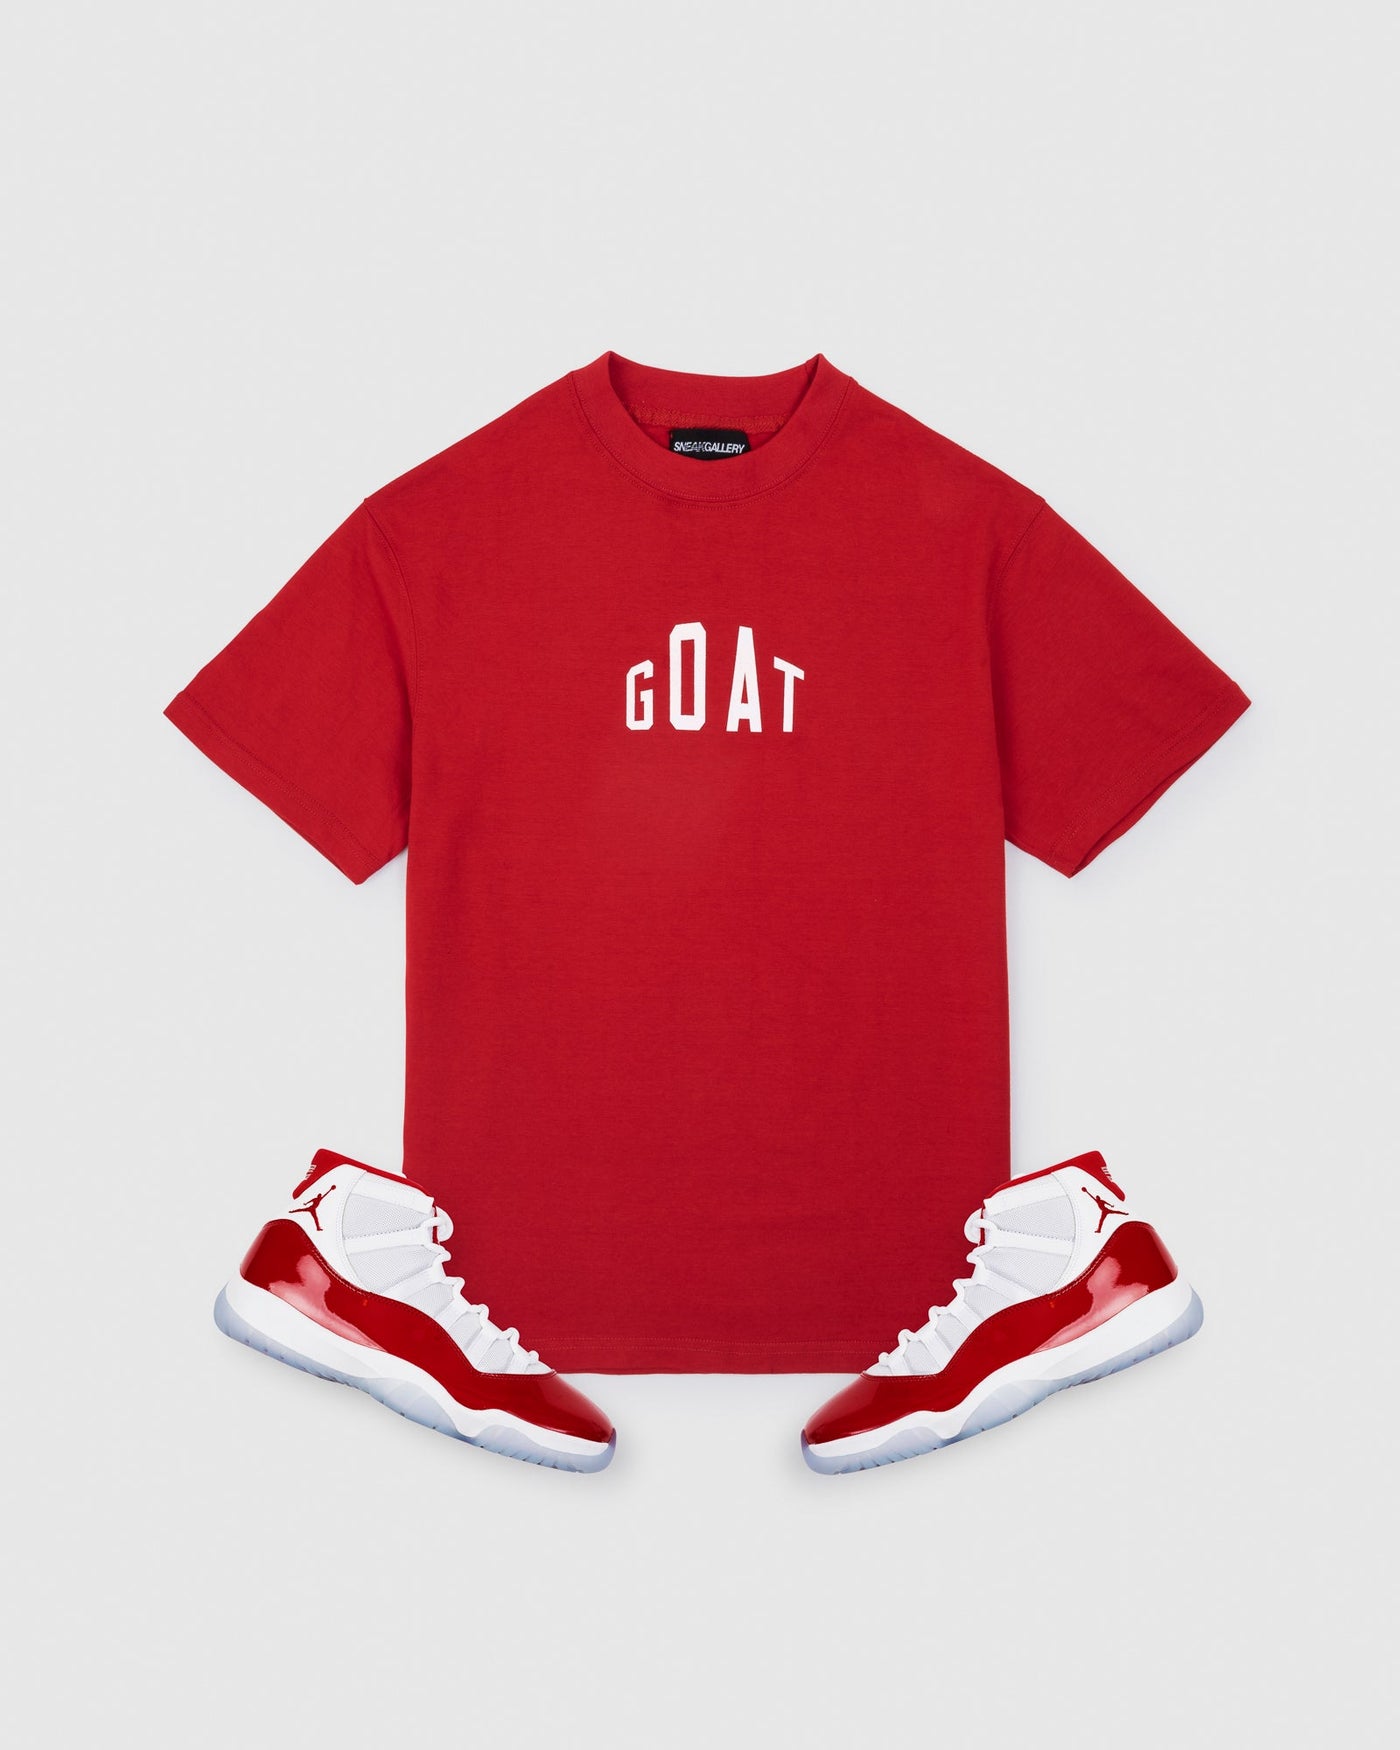 GOAT Big Arch Tee (Cherry Red)